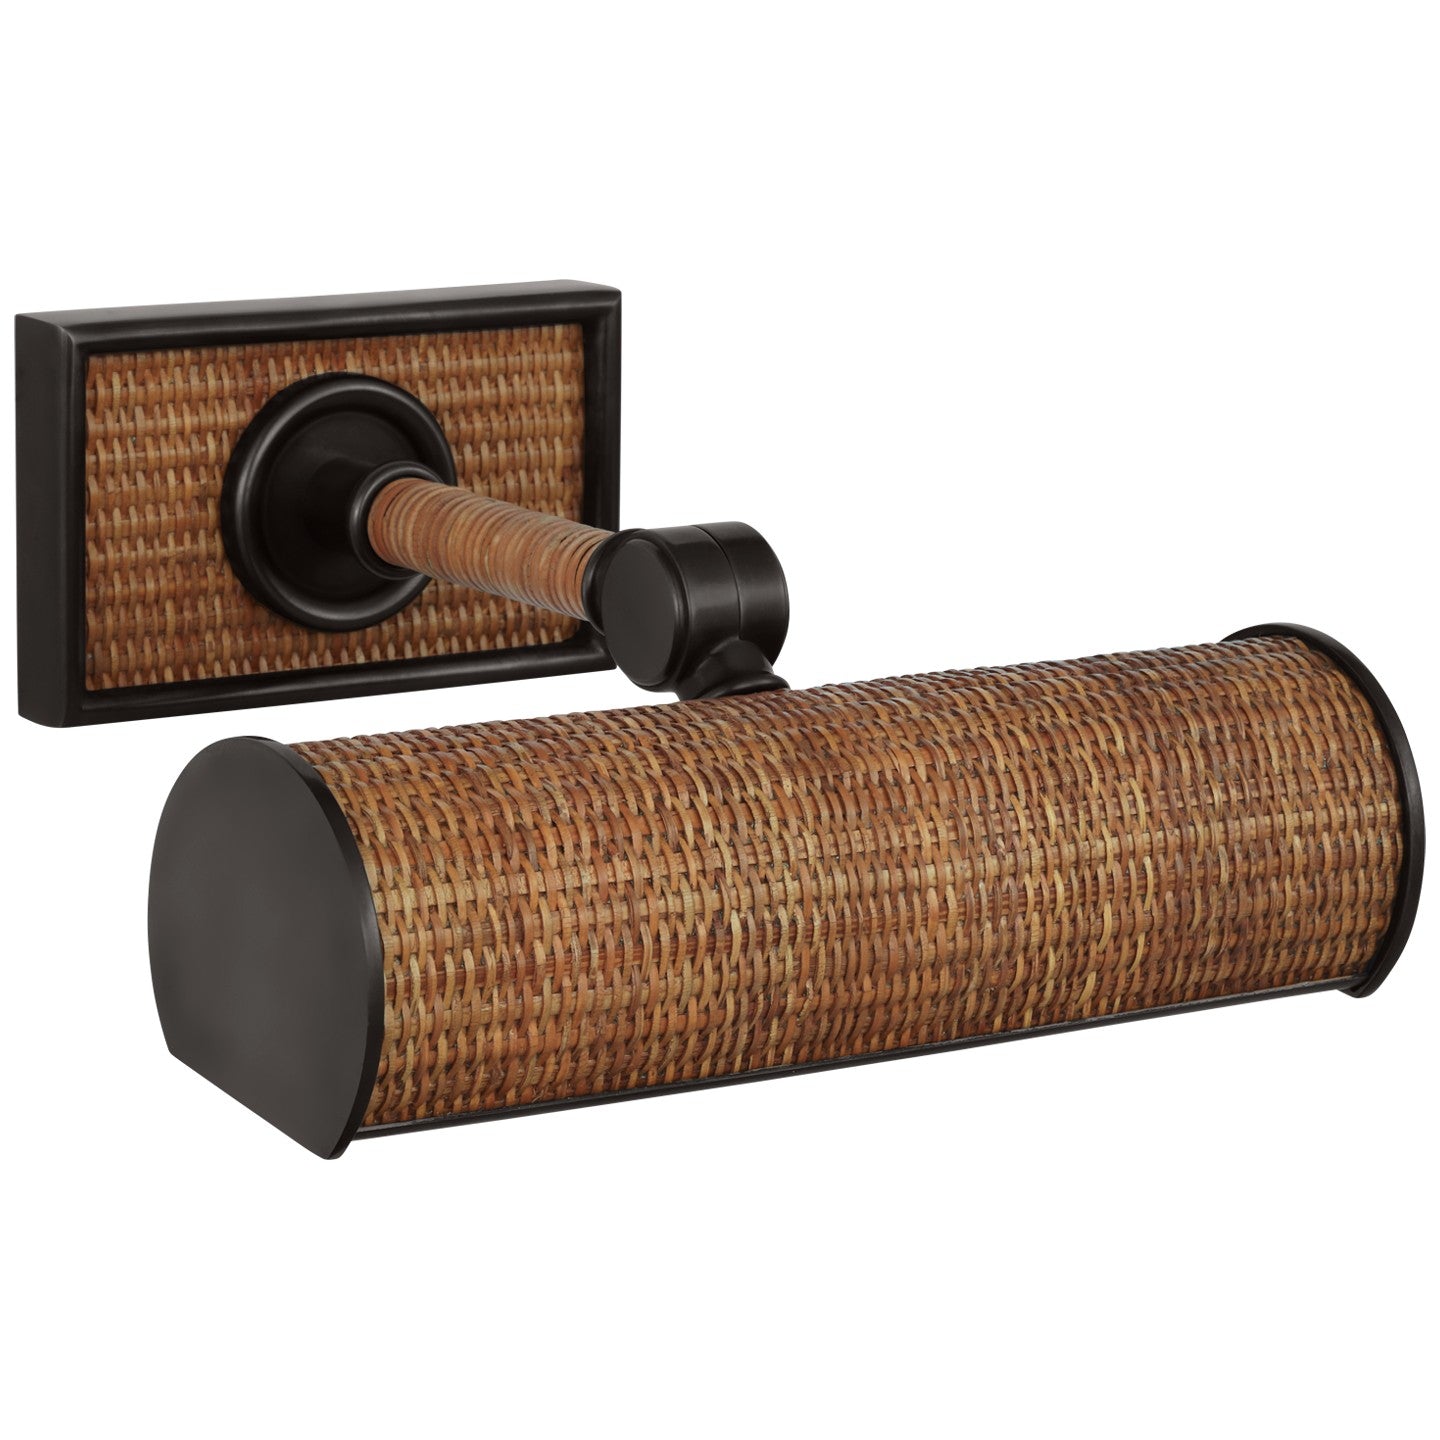 Visual Comfort Signature Canada - LED Picture Light - Halwell - Bronze and Natural Woven Rattan- Union Lighting Luminaires Decor